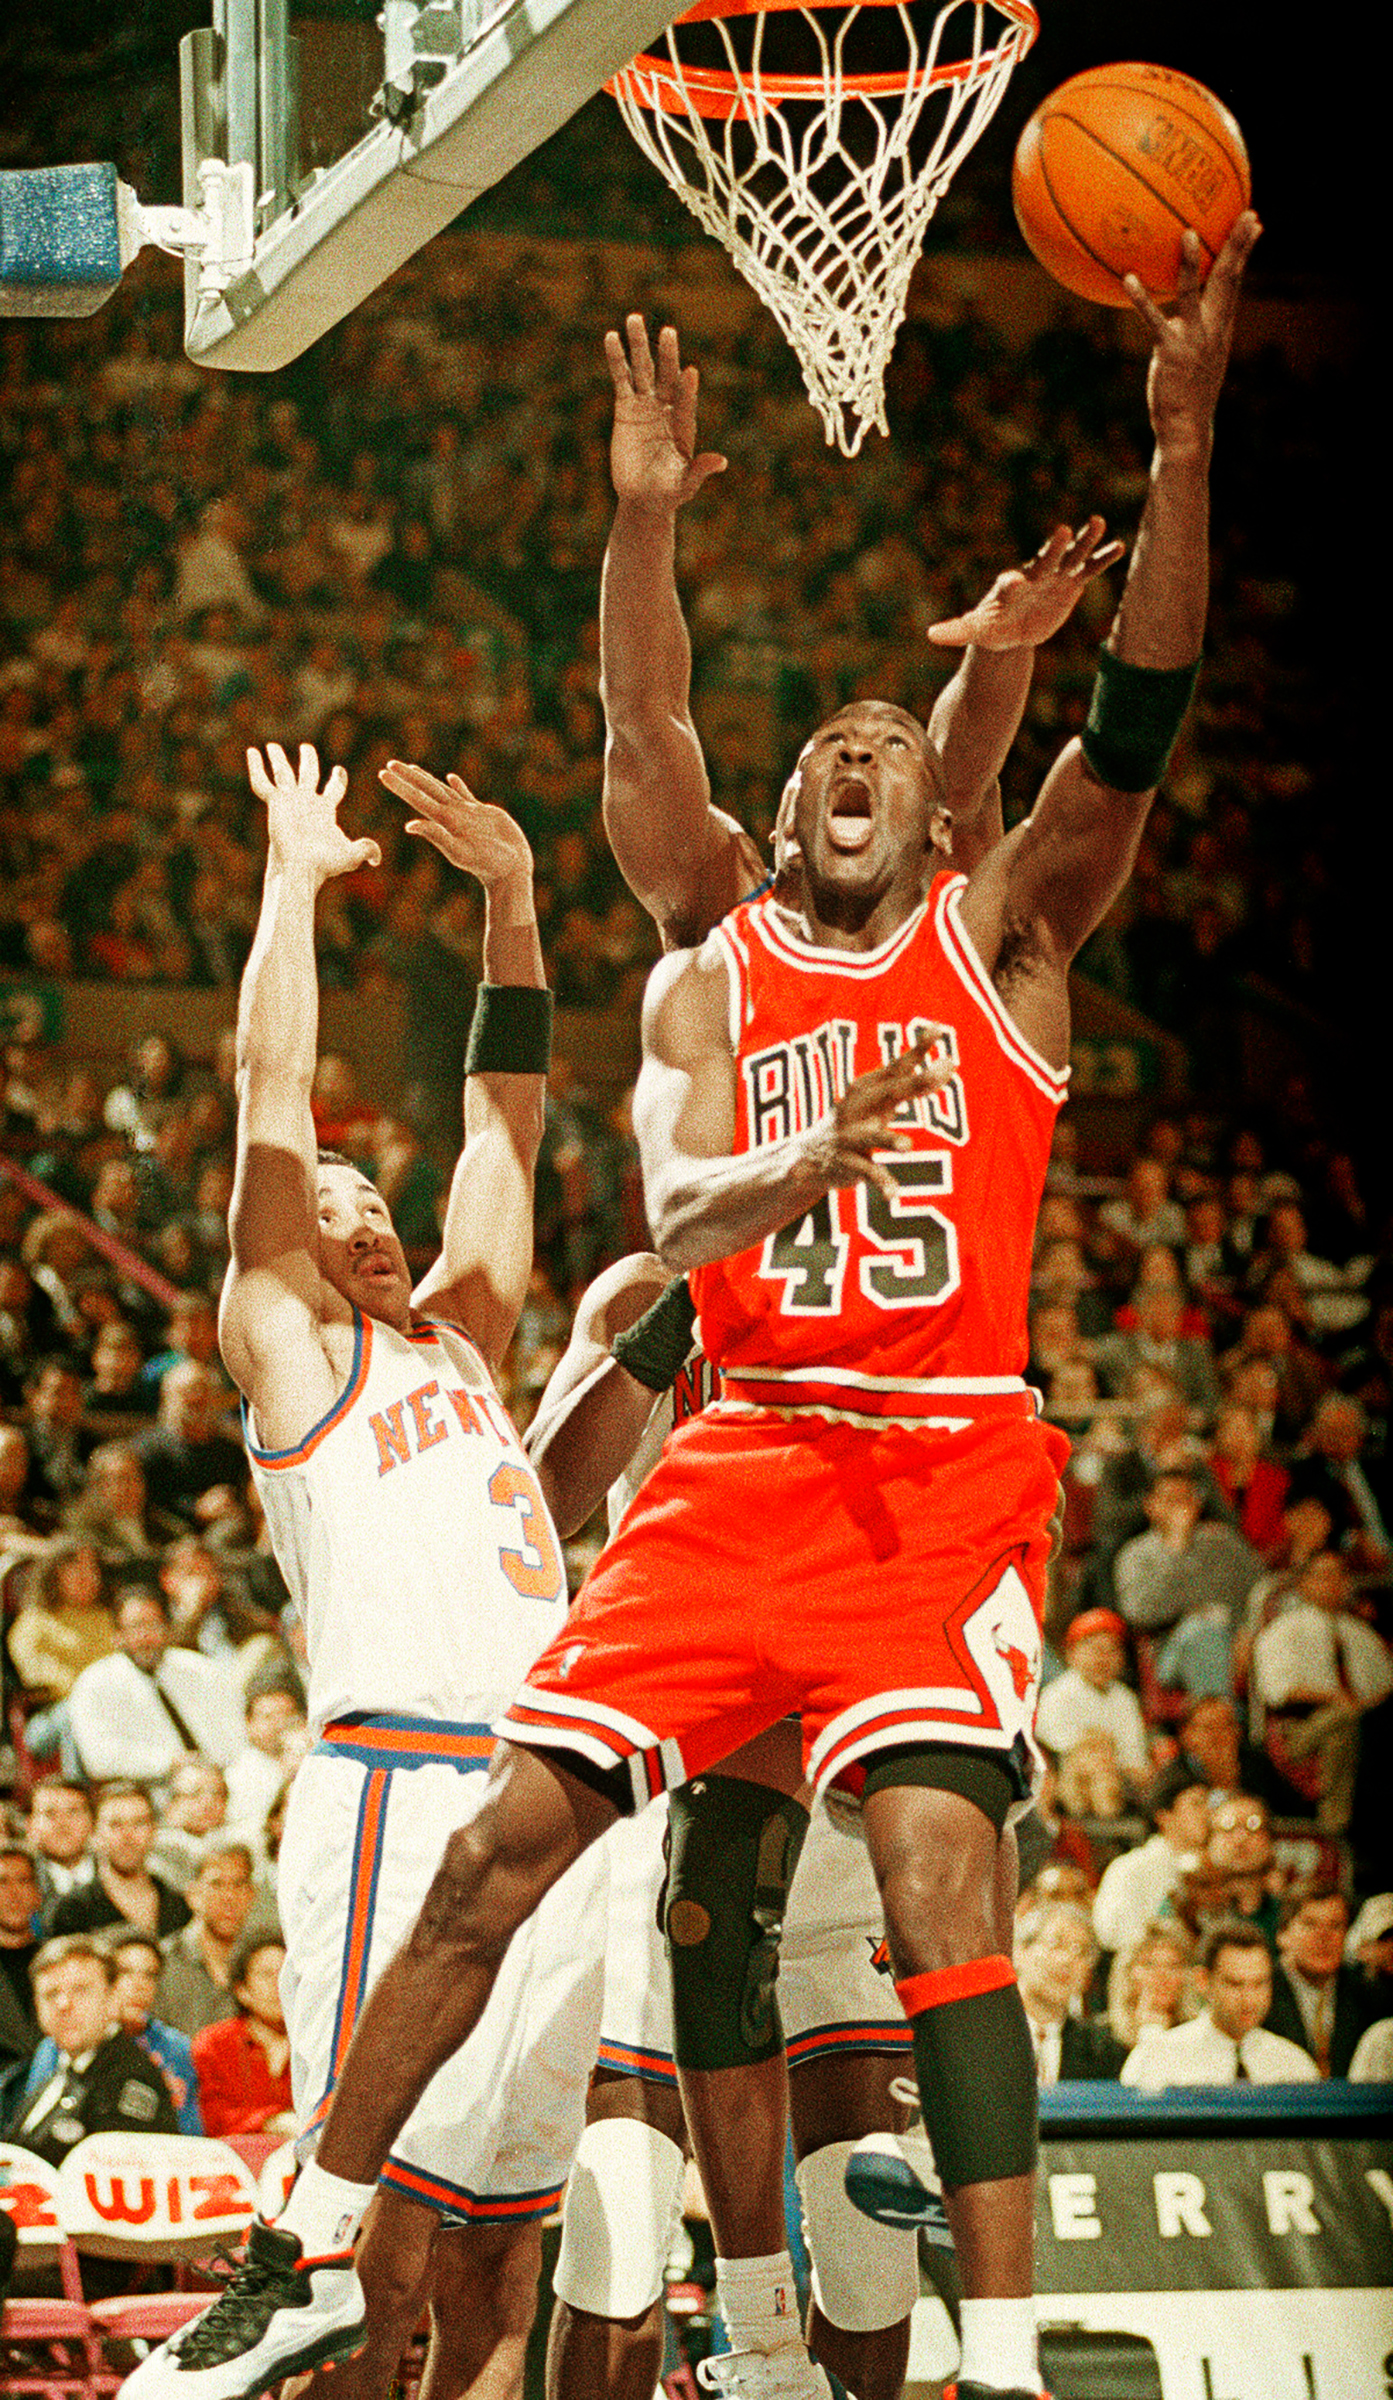 Michael Jordan scores 55 points vs. New York, while wearing No. 45, upon returning to the NBA in 1995. (Ron Frehm—AP)